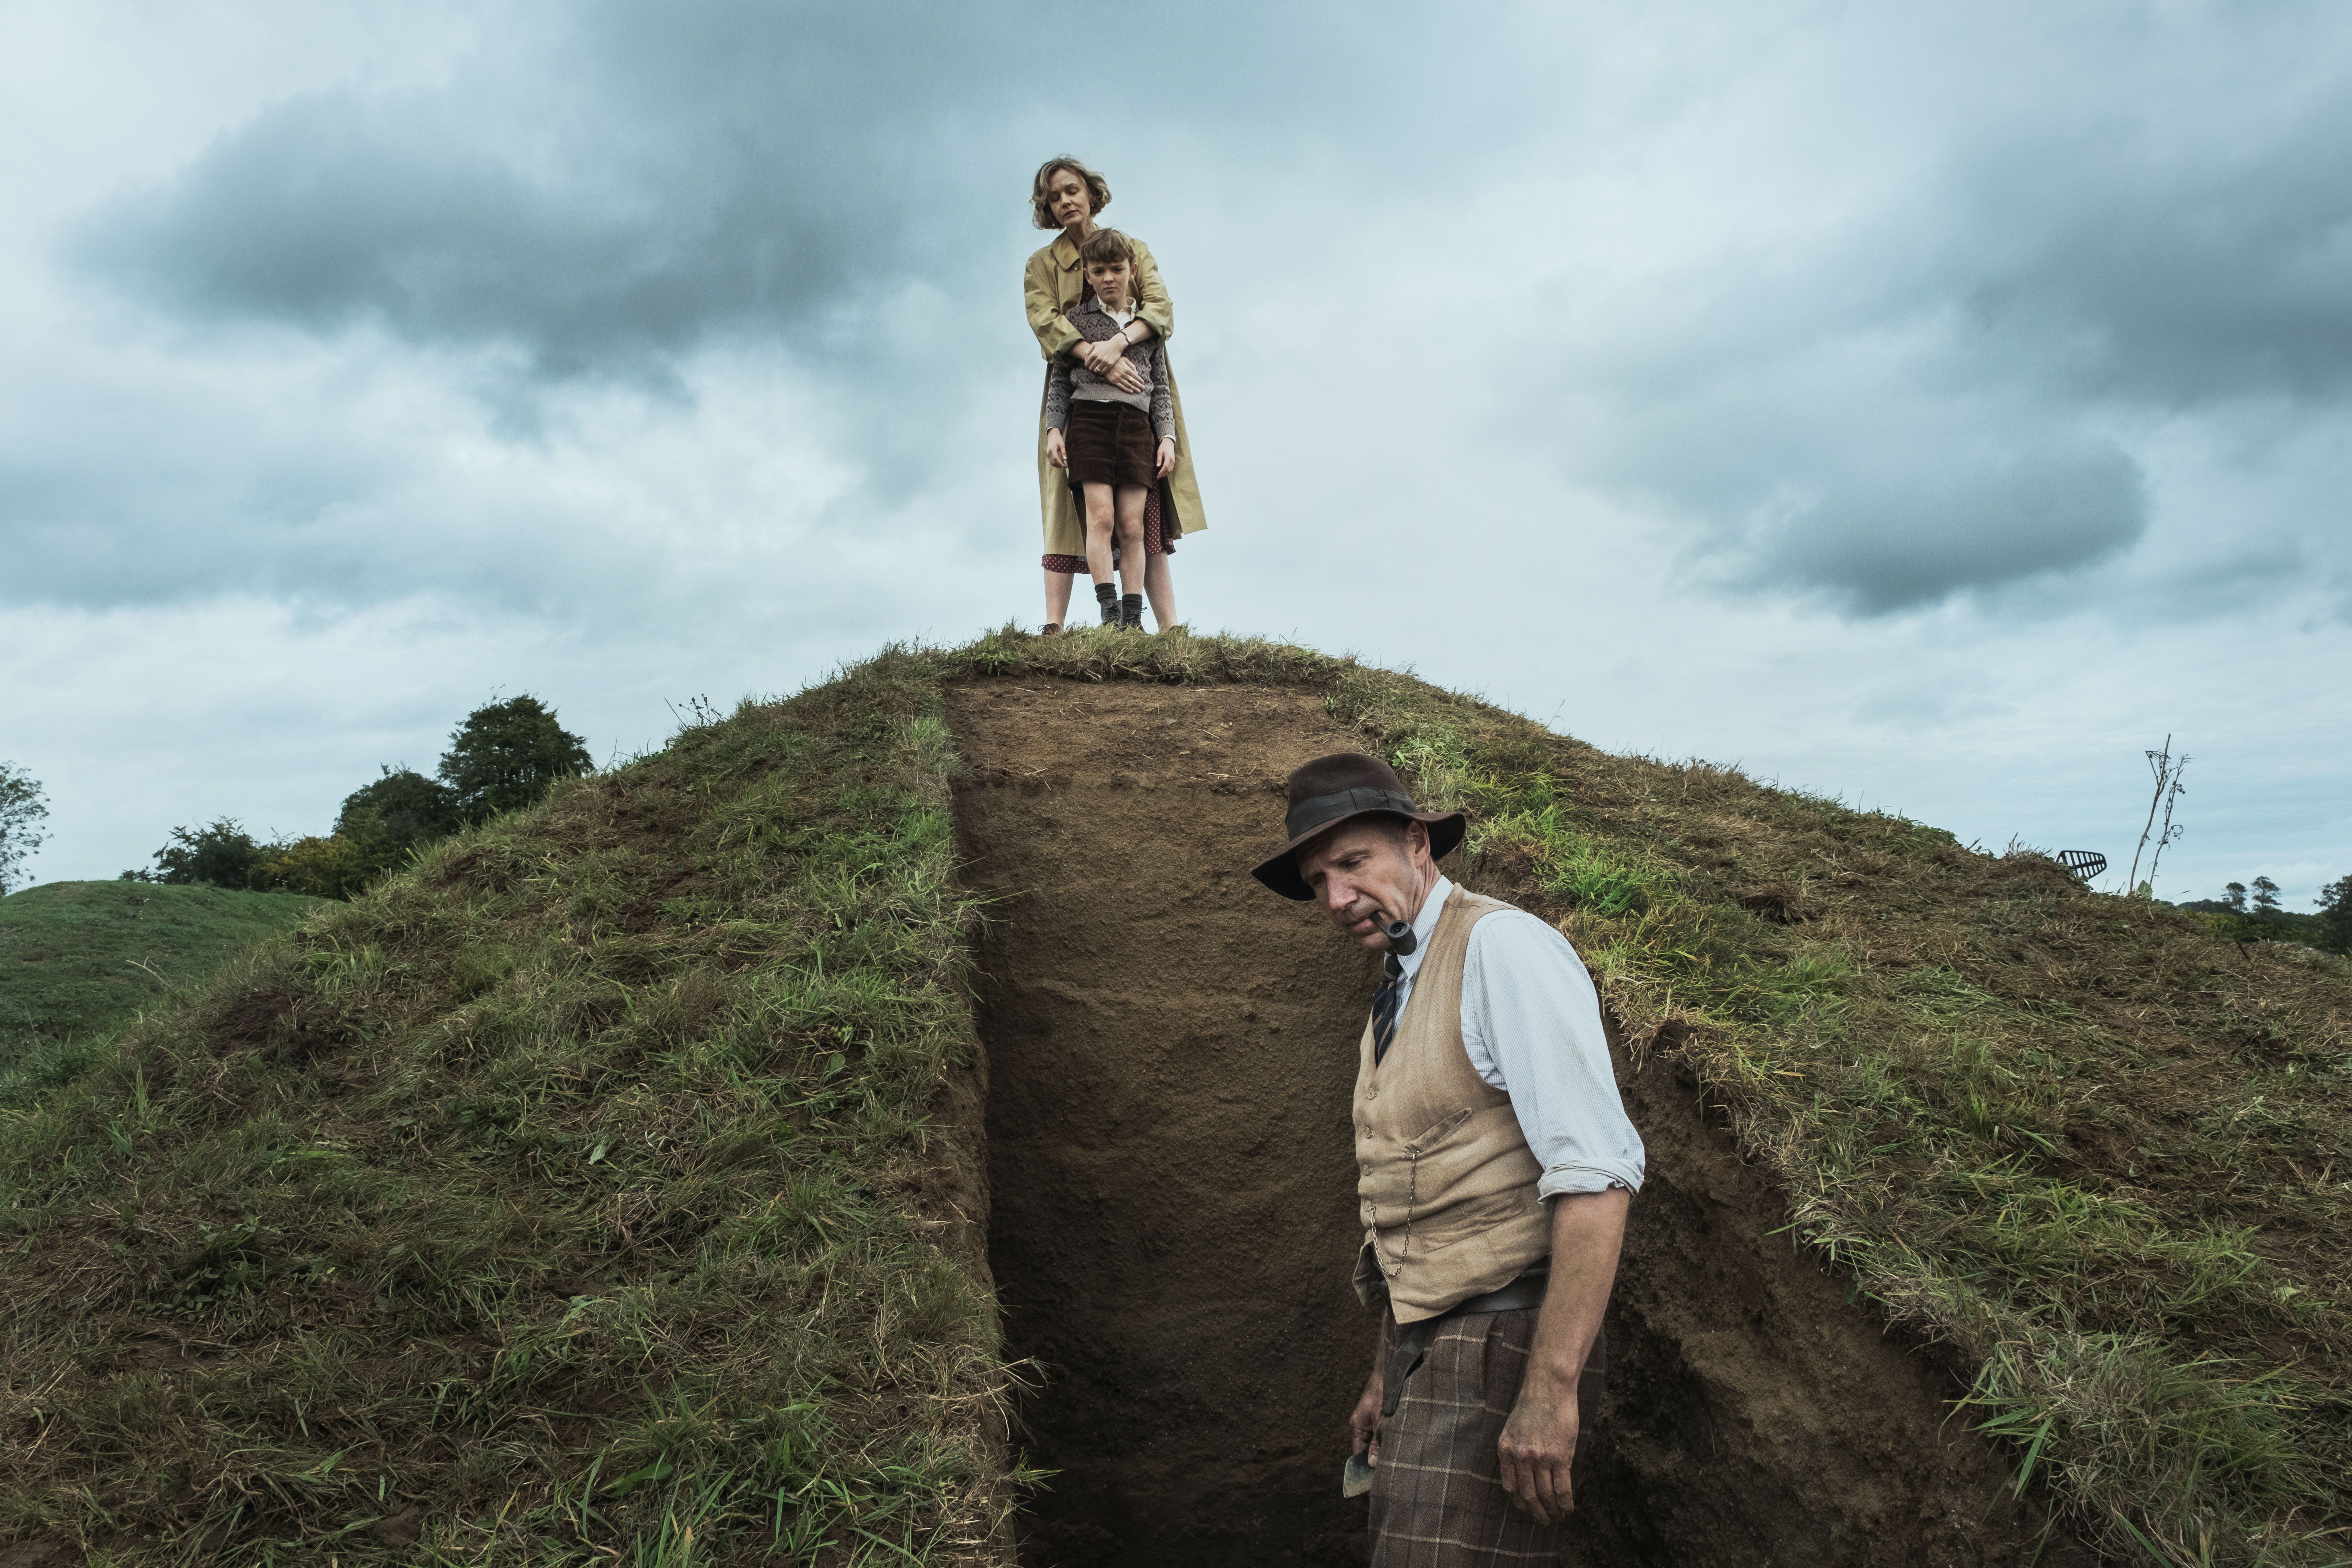 Review Netflixs The Dig with Ralph Fiennes, Carey Mulligan